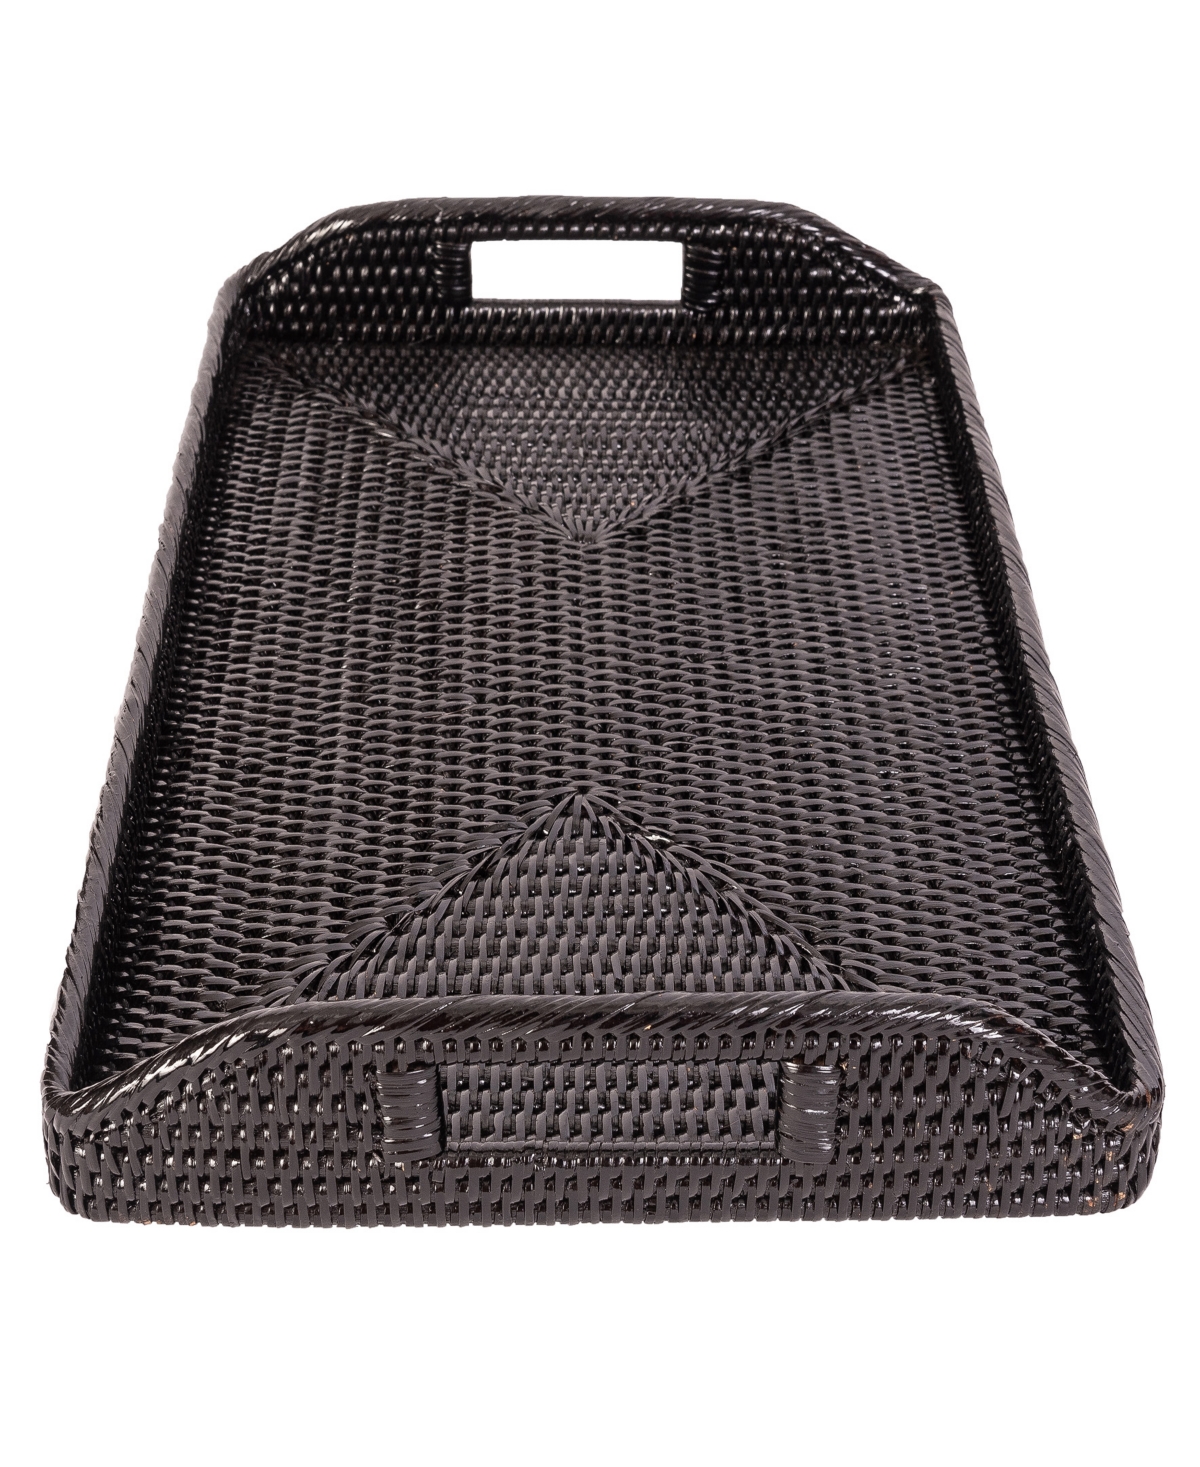 Artifacts Trading Company Rattan 17" Rectangular Serving Tray With High Handles In Tudor Black